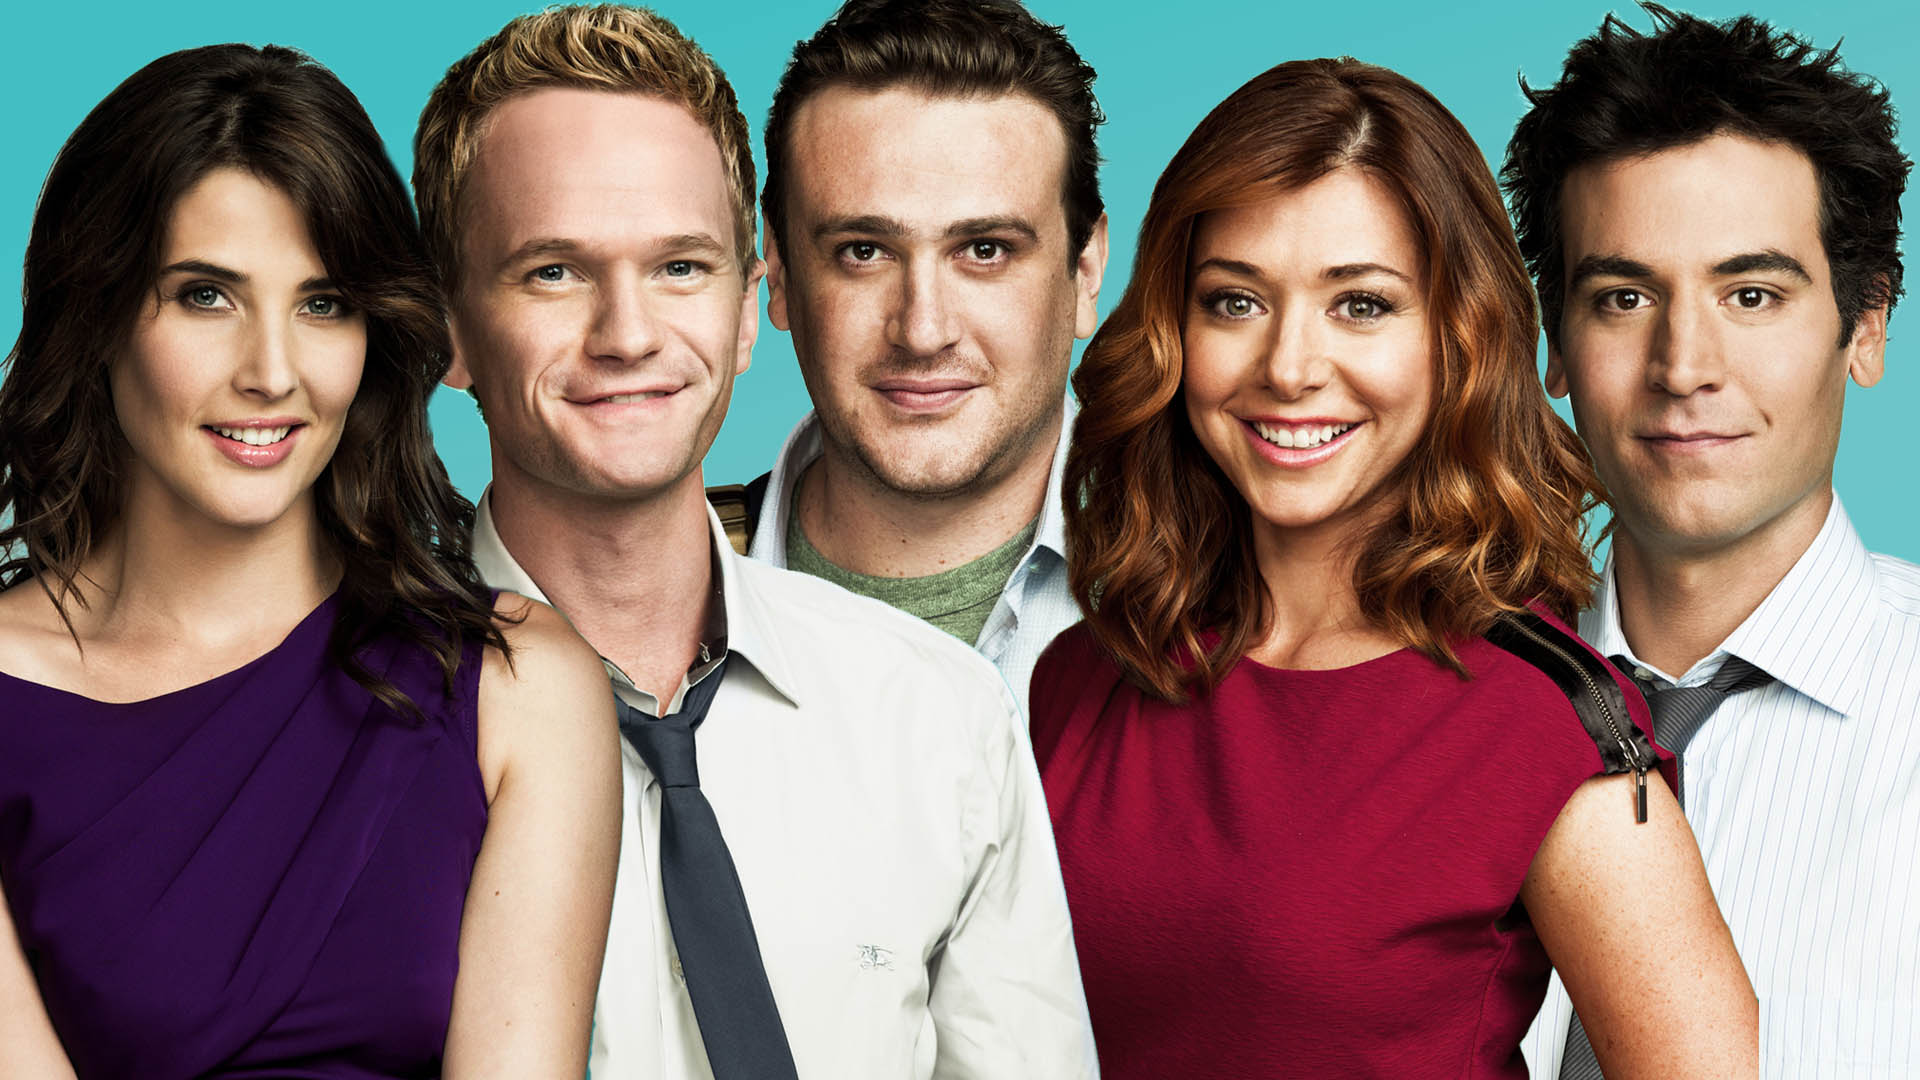 How I Met Your Mother Full HD Widescreen wallpapers for